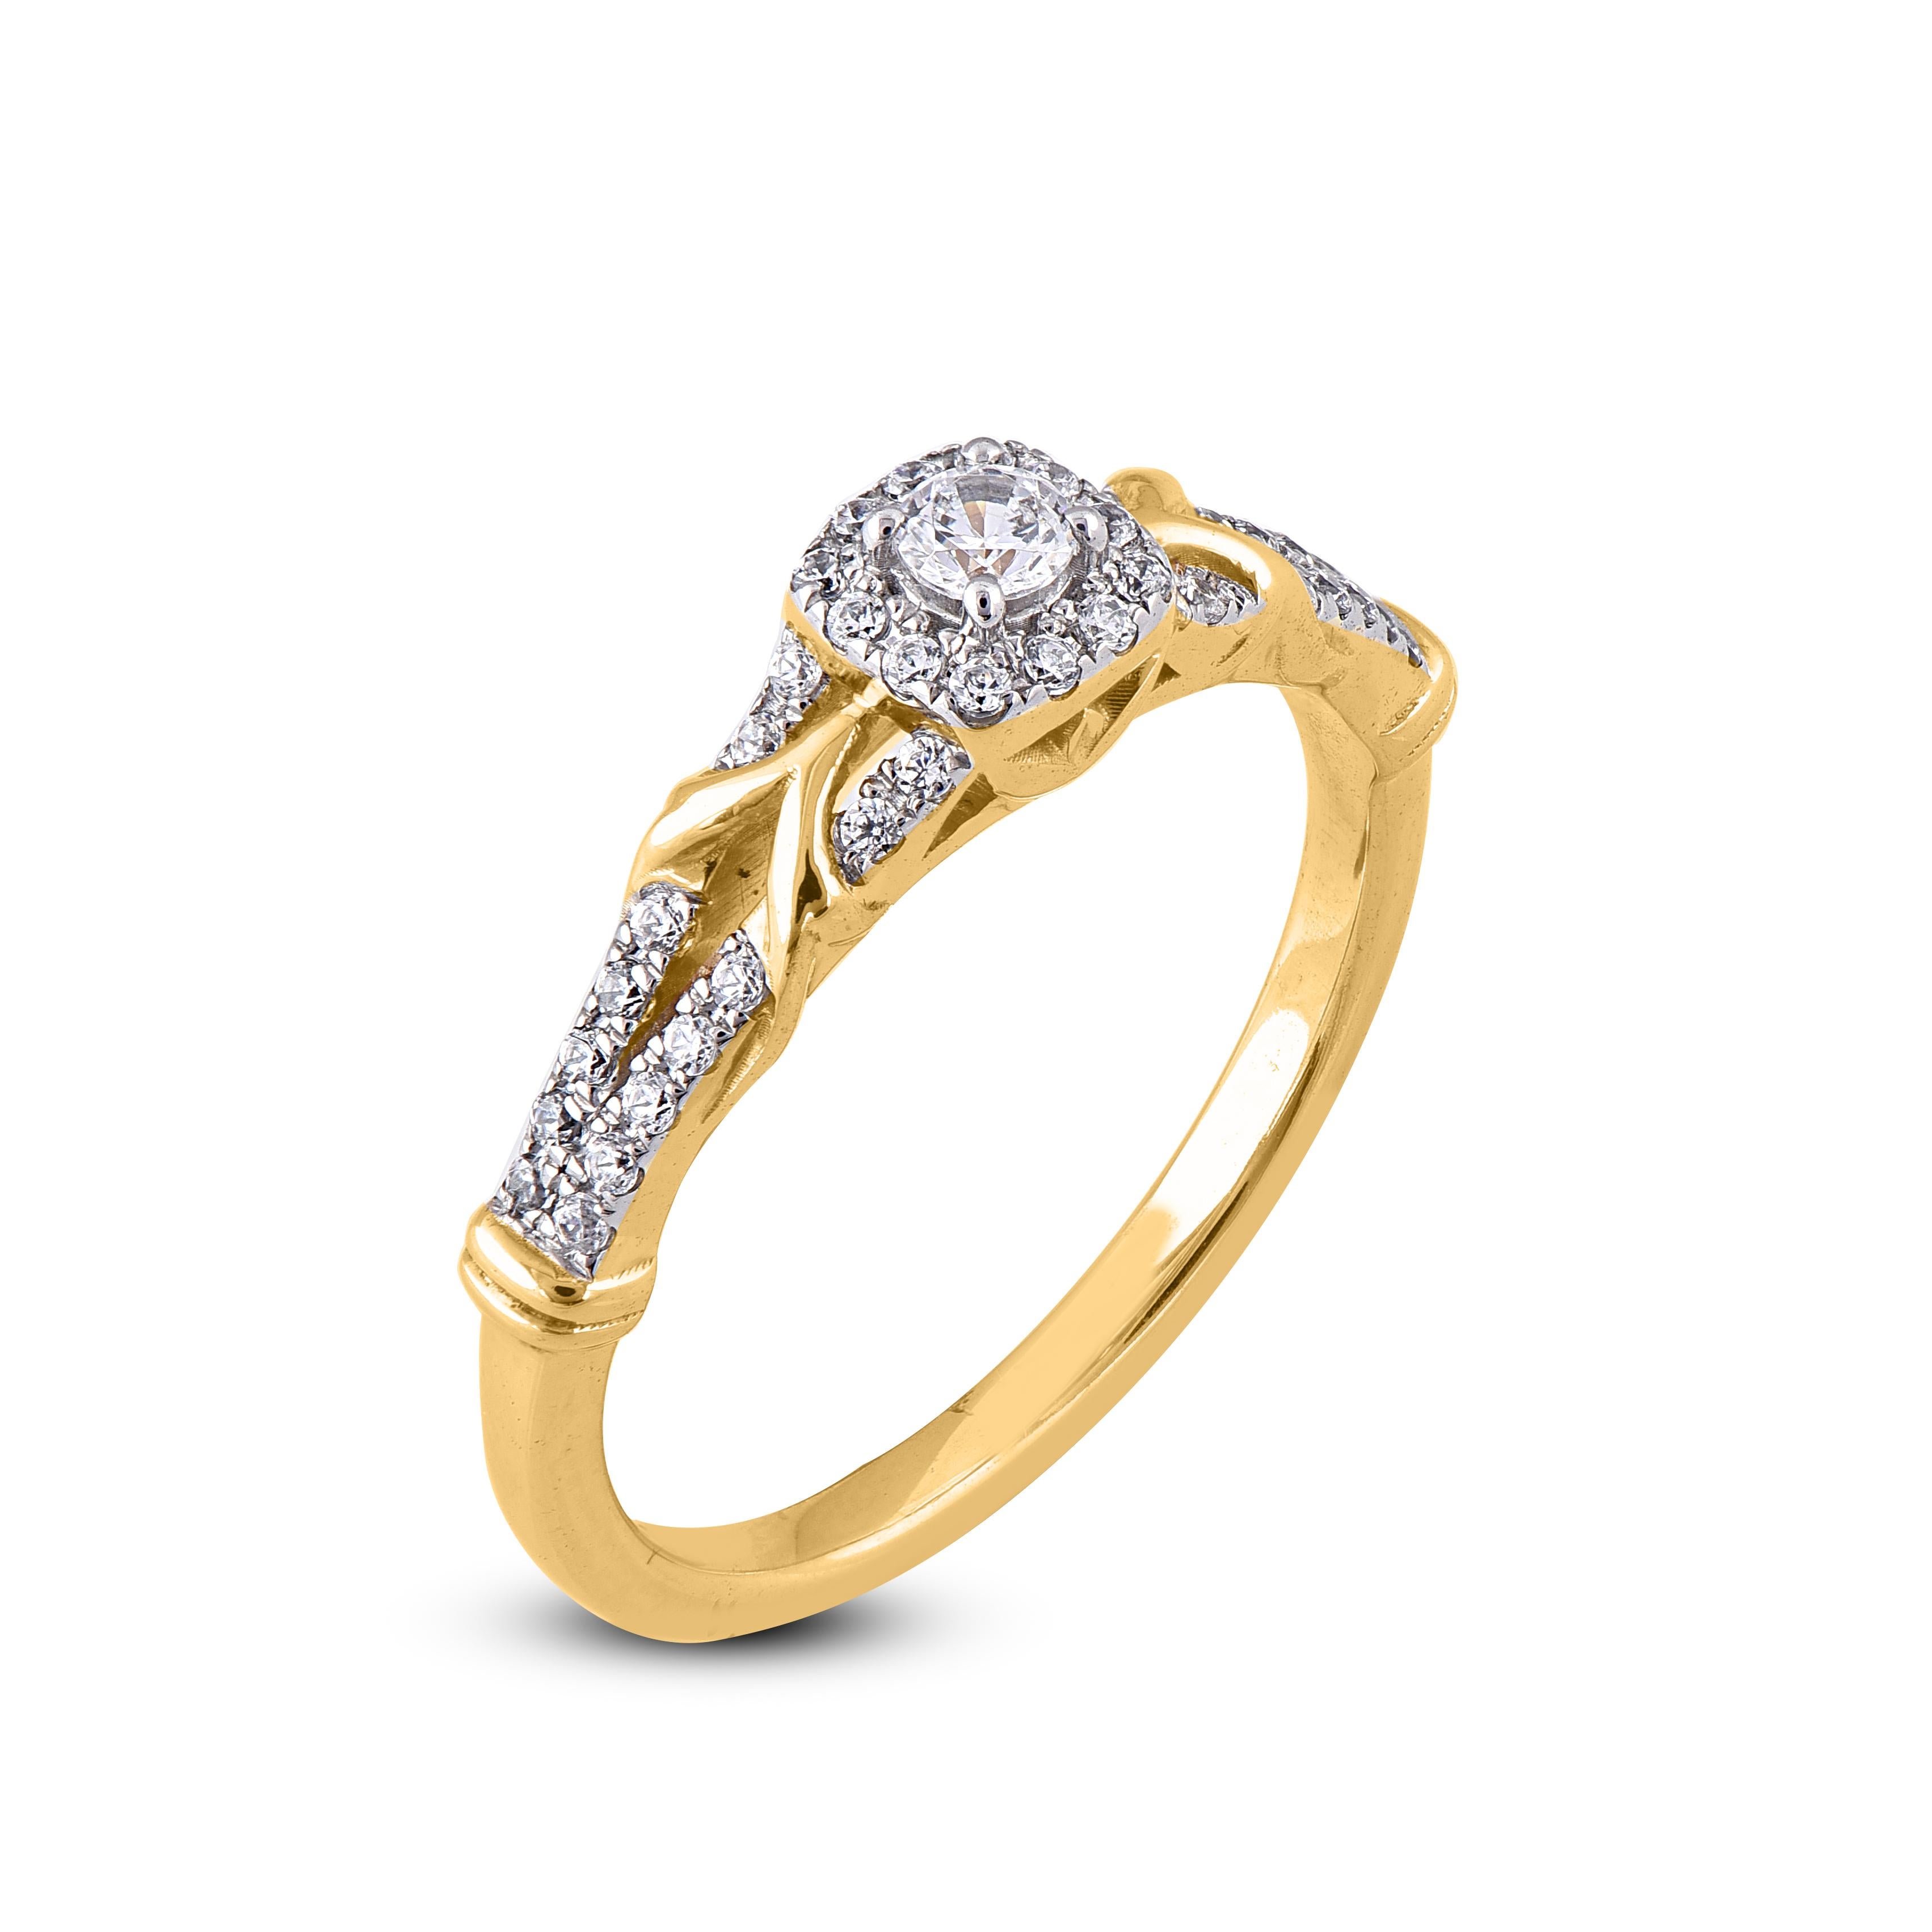 This Engagement Ring is expertly crafted in 14 Karat yellow gold and features 41 round dimaond in 0.30 ct frame and shank lined diamond set in prong setting. The diamonds are natural, not treated and dazzles in H-I color and I2 clarity.. This ring